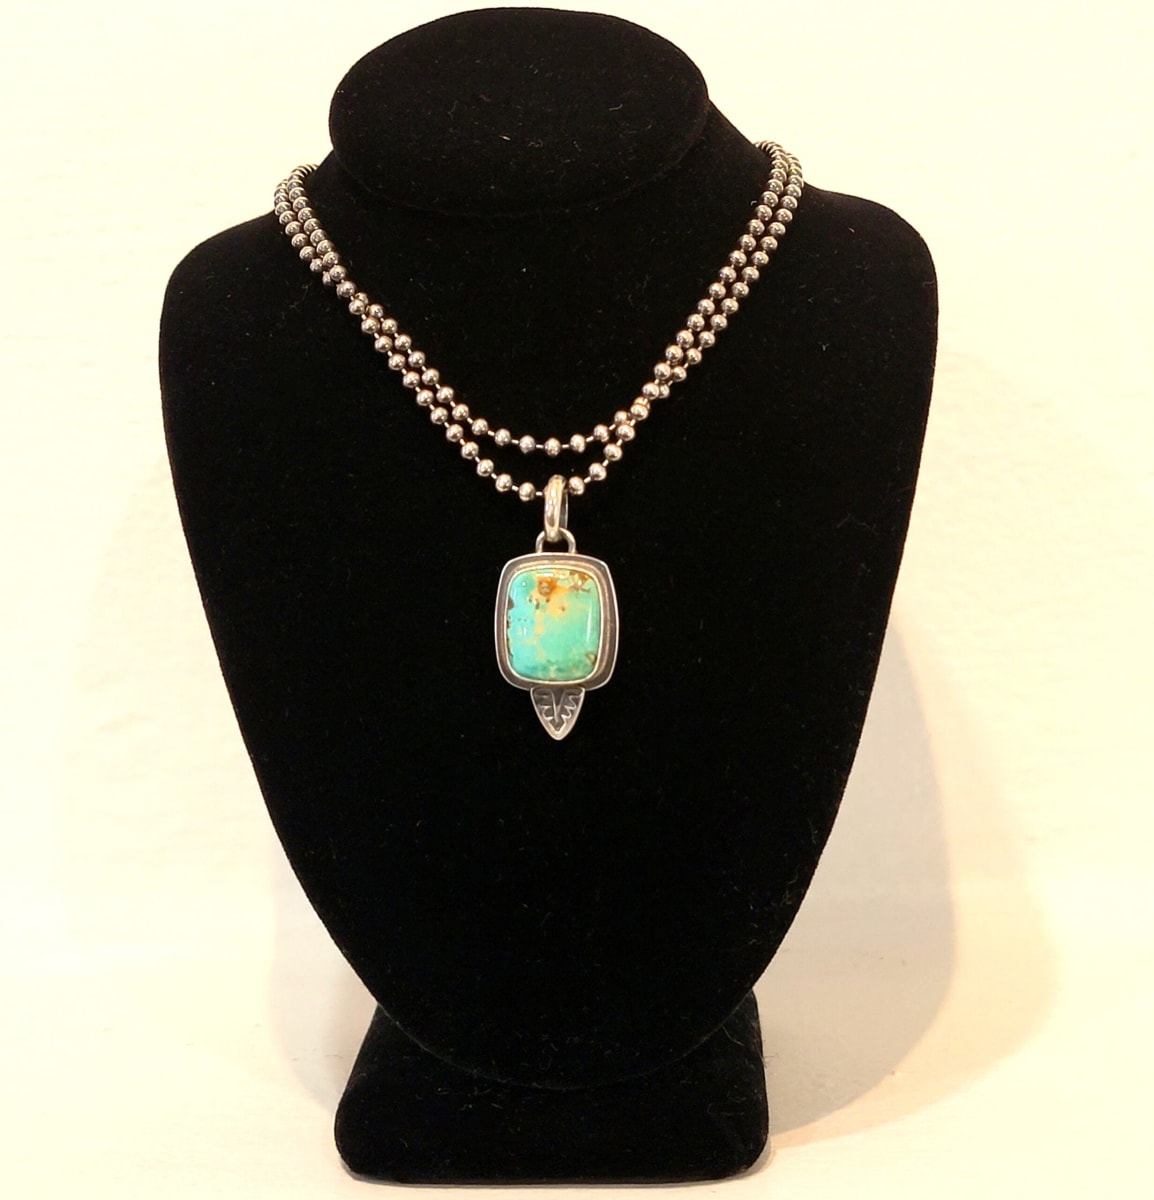 "Just Tickled Necklace" - Sweet Cushion Cut Kingman Turquoise with Stamp Accent on Long Delicate Bead Ball Chain by Shasta Brooks  Image: All Art © Shasta Brooks Studio LLC